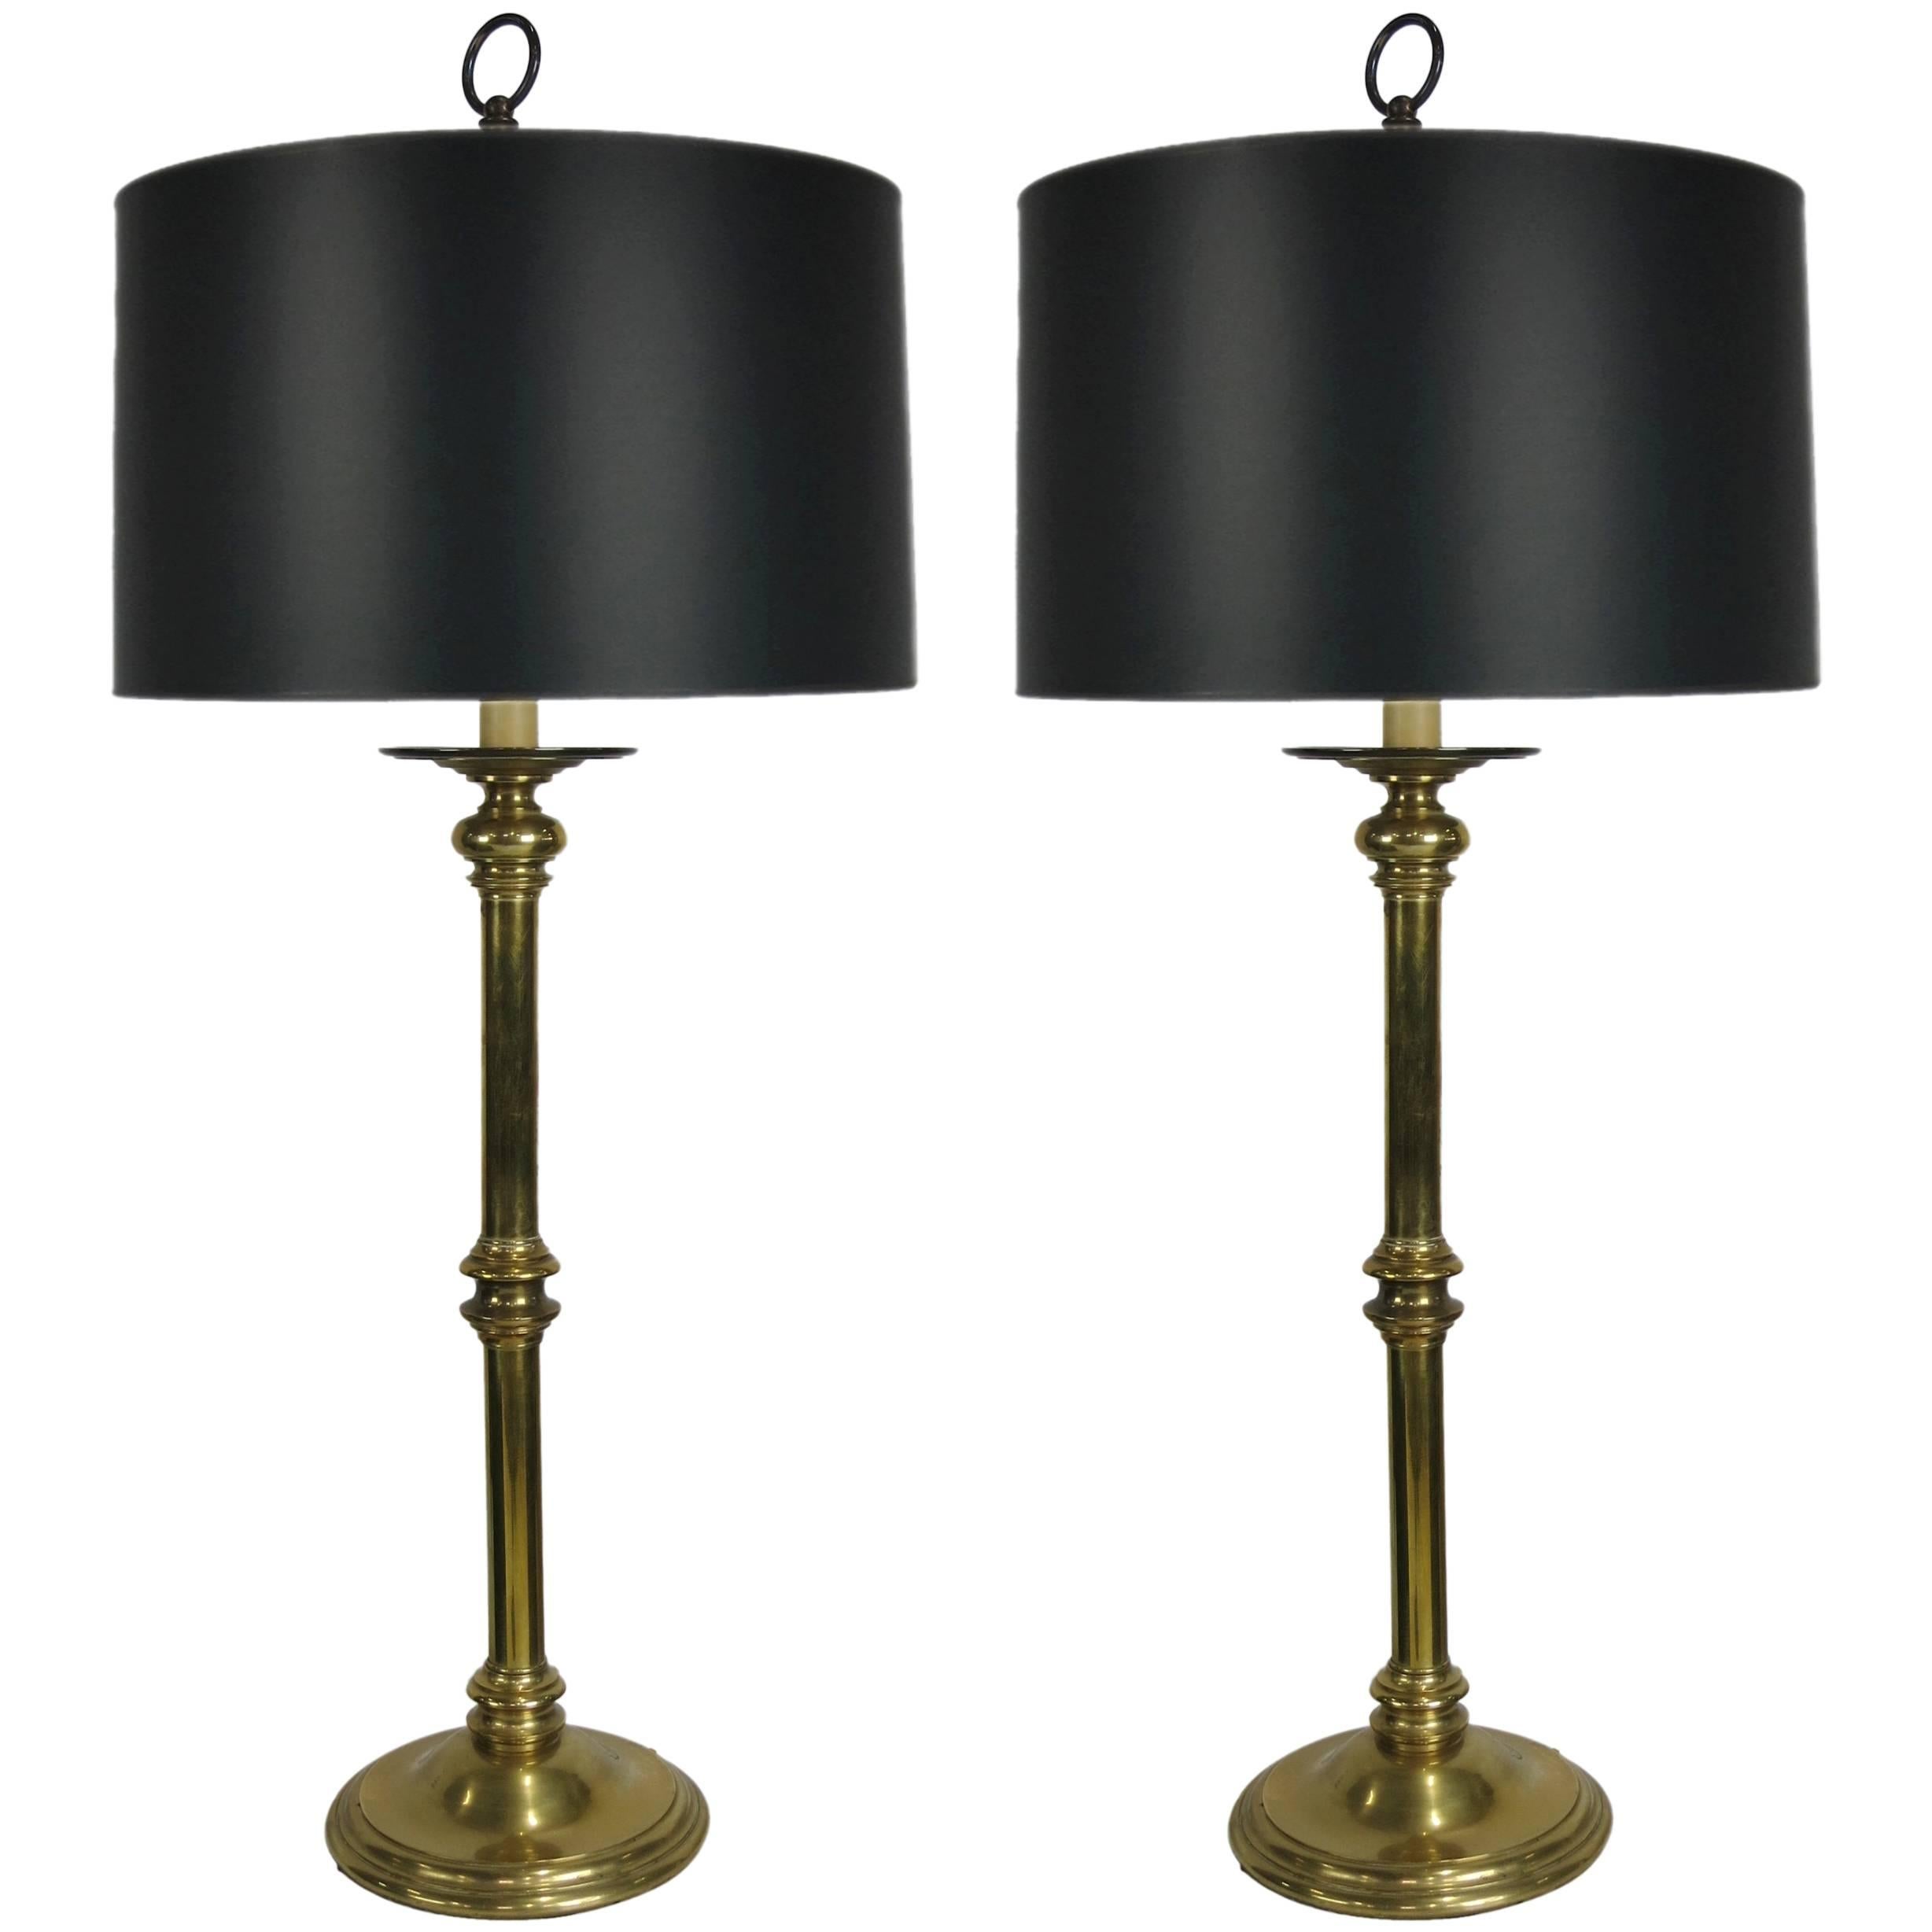 Pair of Brass Candlestick Lamps by Paul Hanson